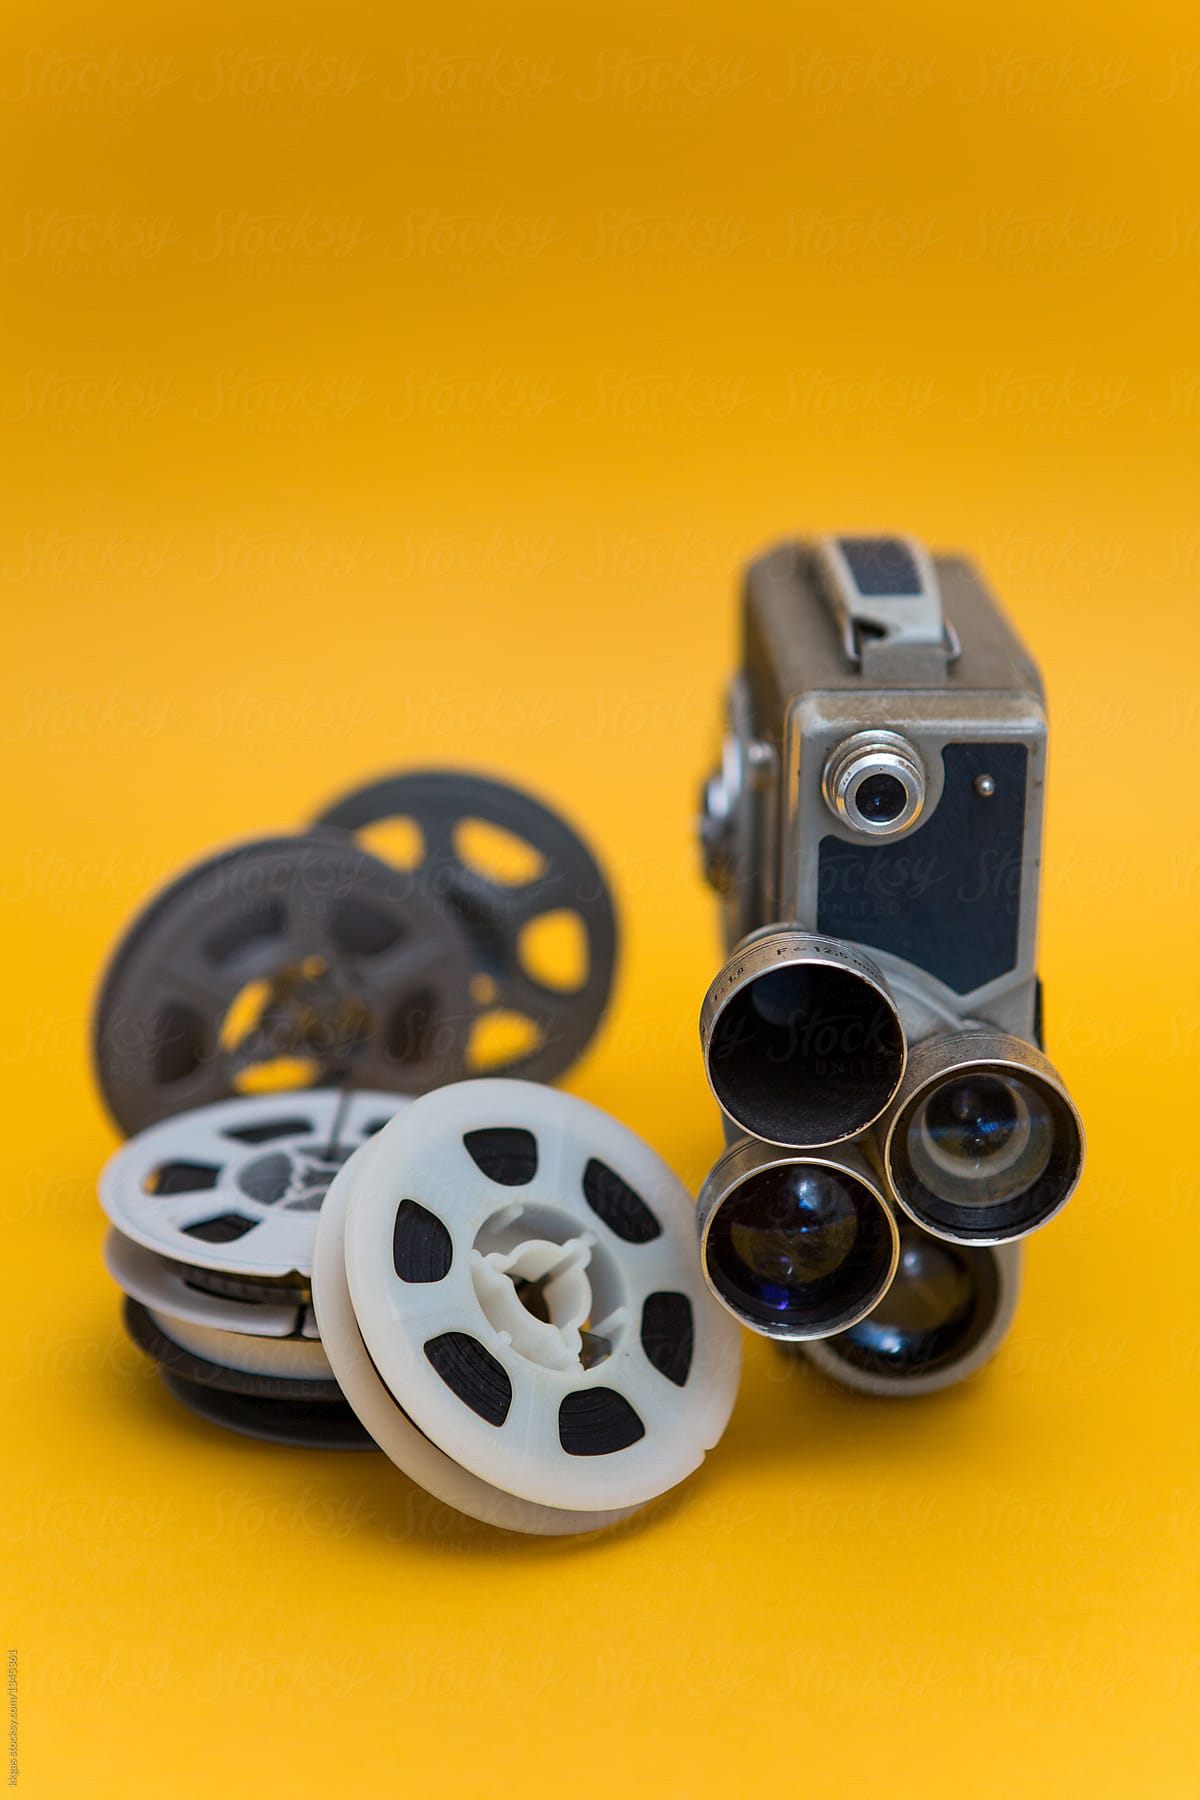 Vintage Cinema Camera And Reels Over Pink Background by Stocksy  Contributor Kkgas - Stocksy